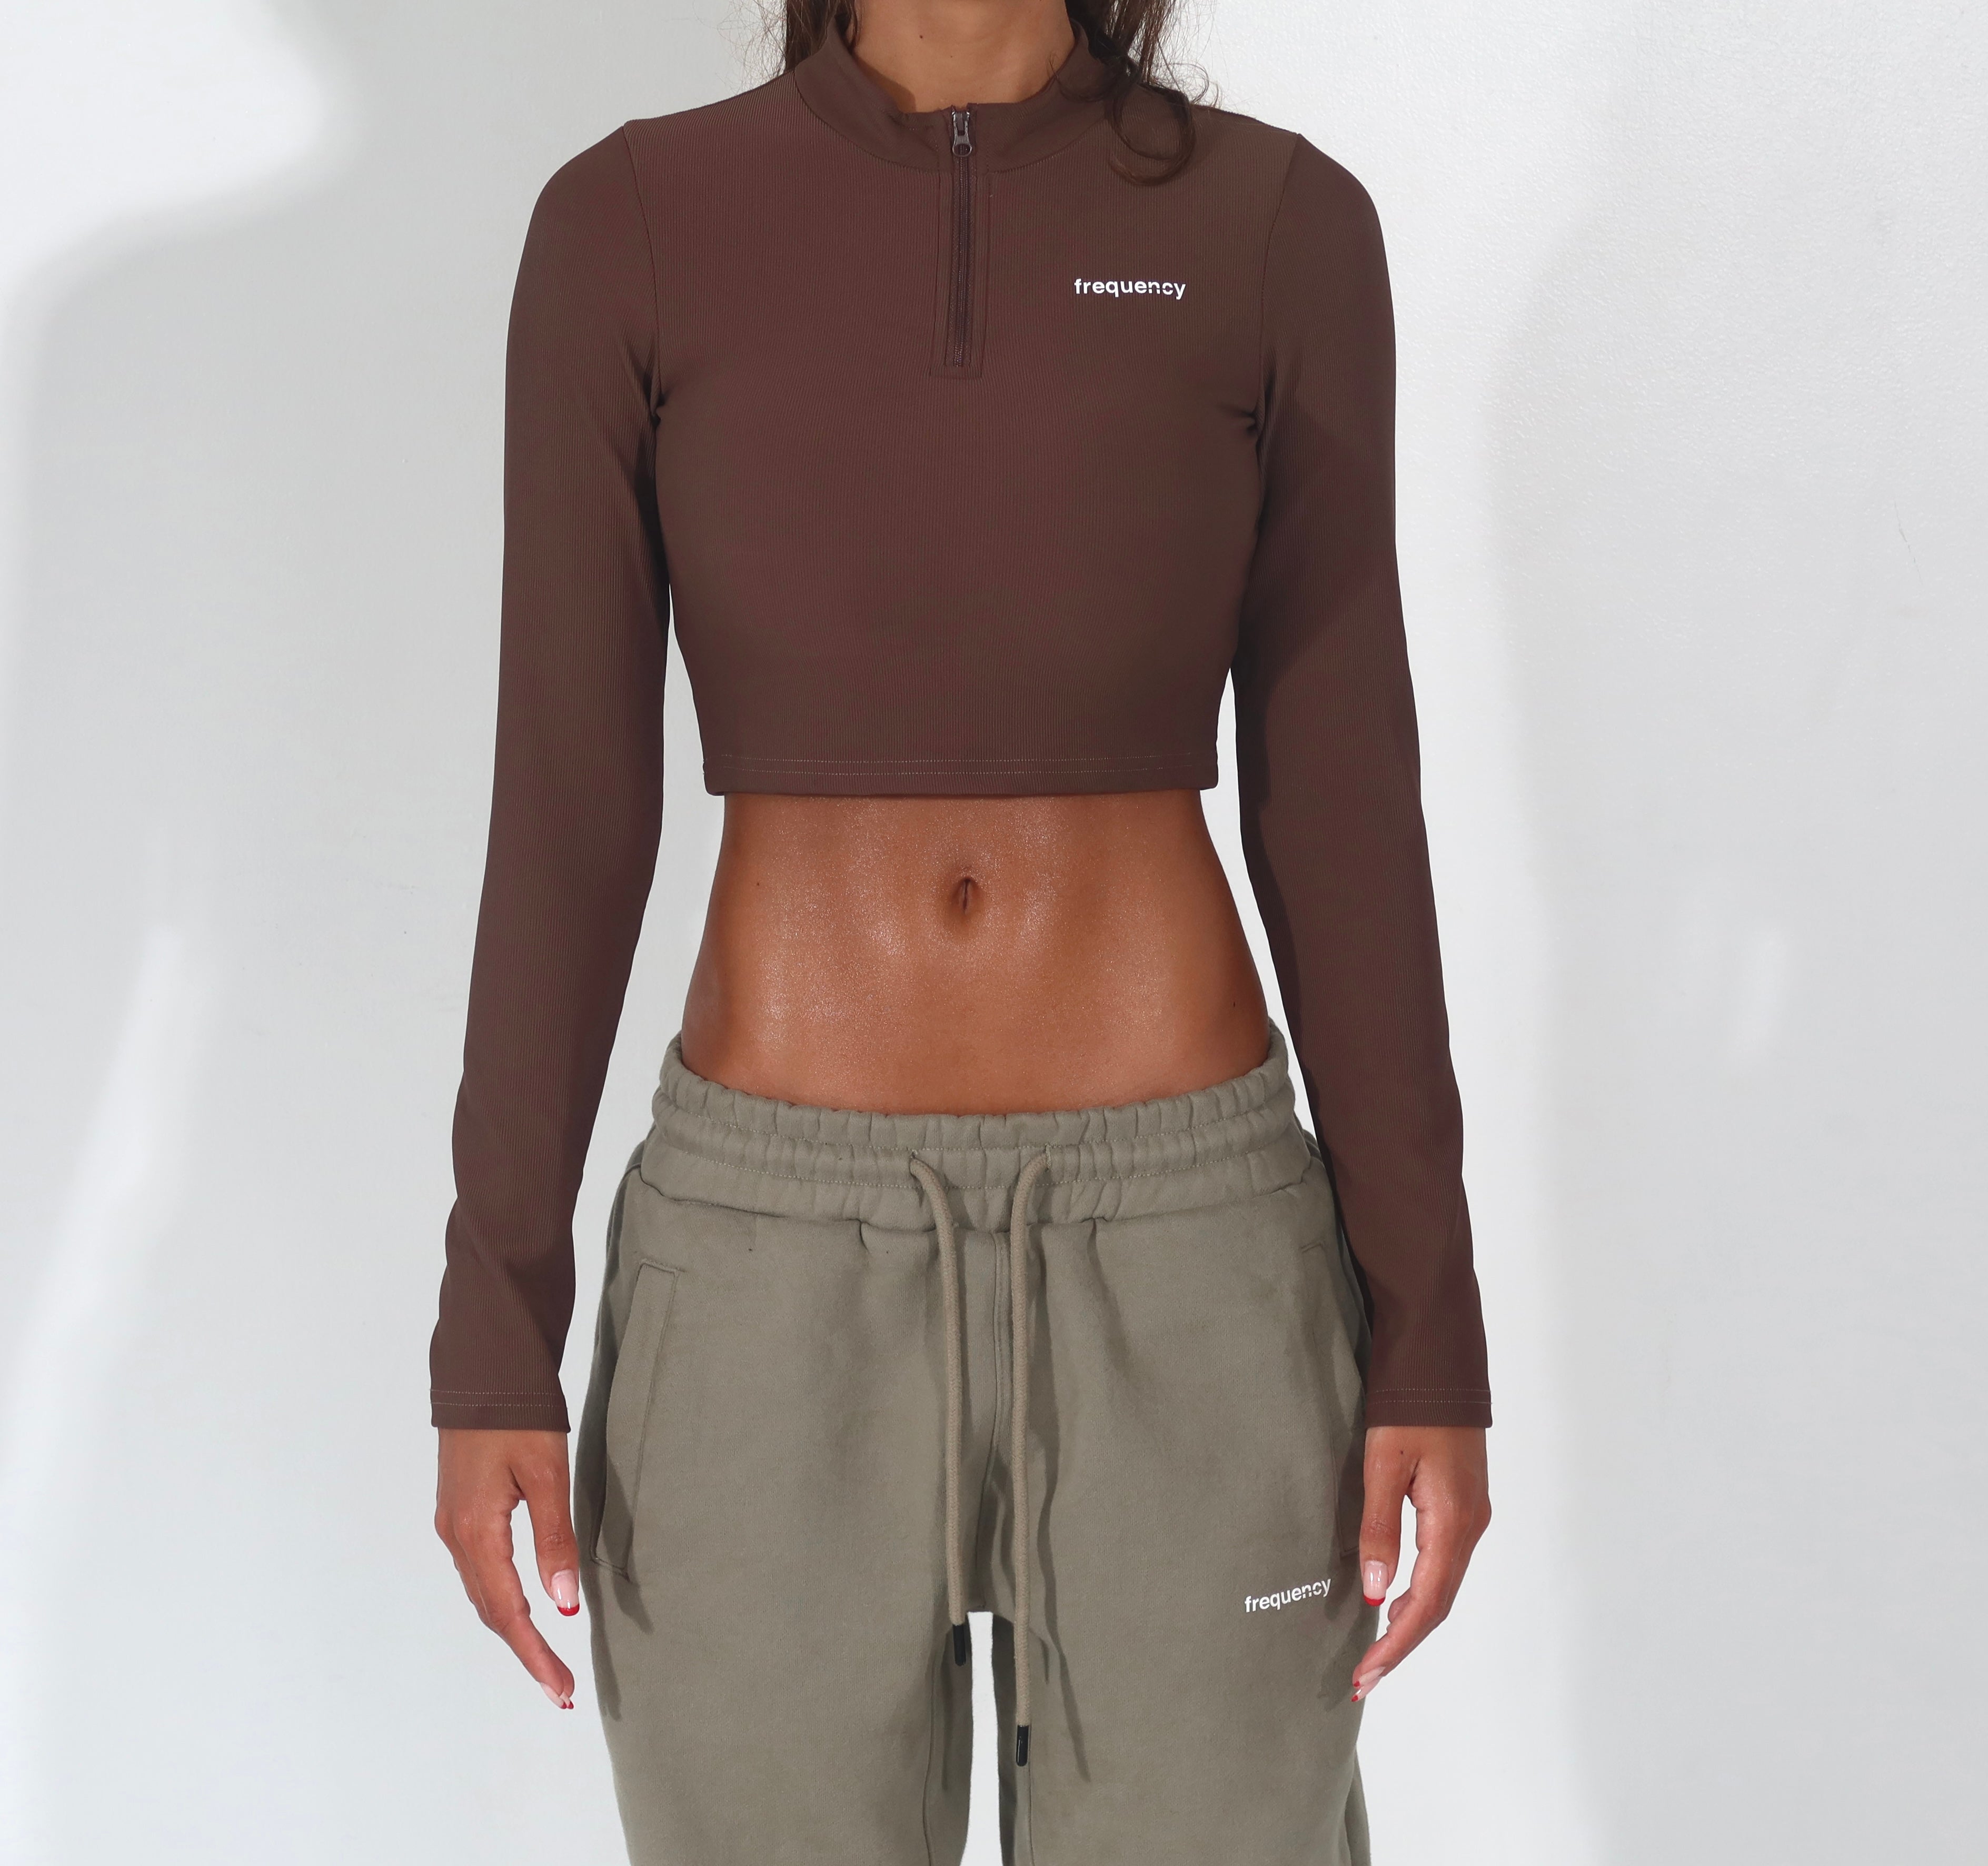 Frequency Skin CLS Ribbed Top